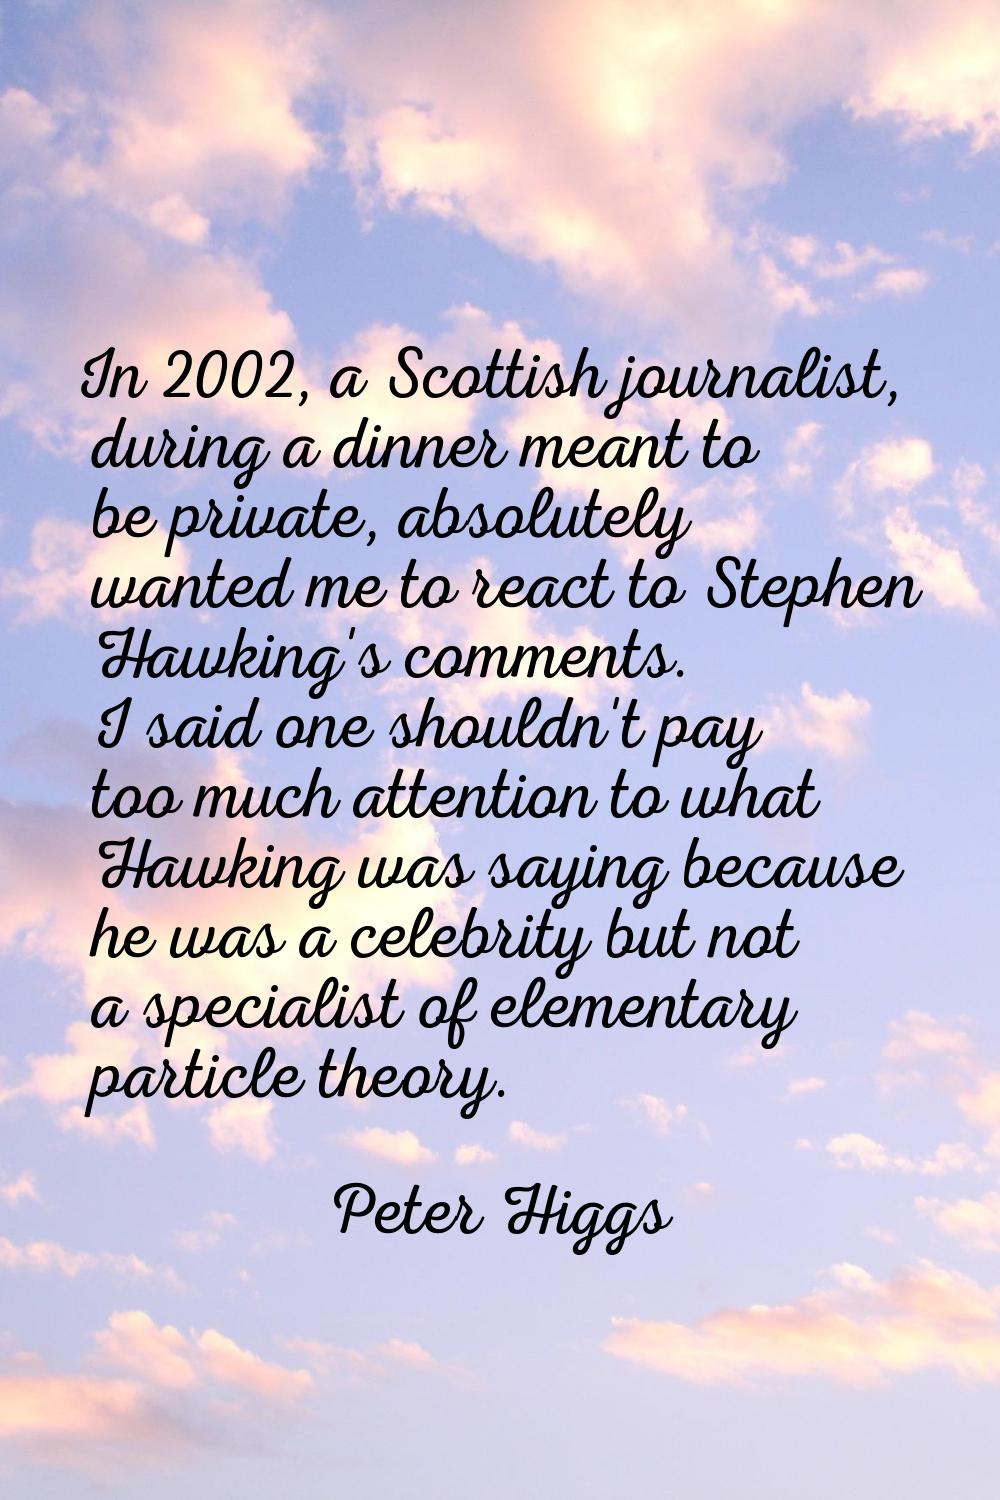 In 2002, a Scottish journalist, during a dinner meant to be private, absolutely wanted me to react 